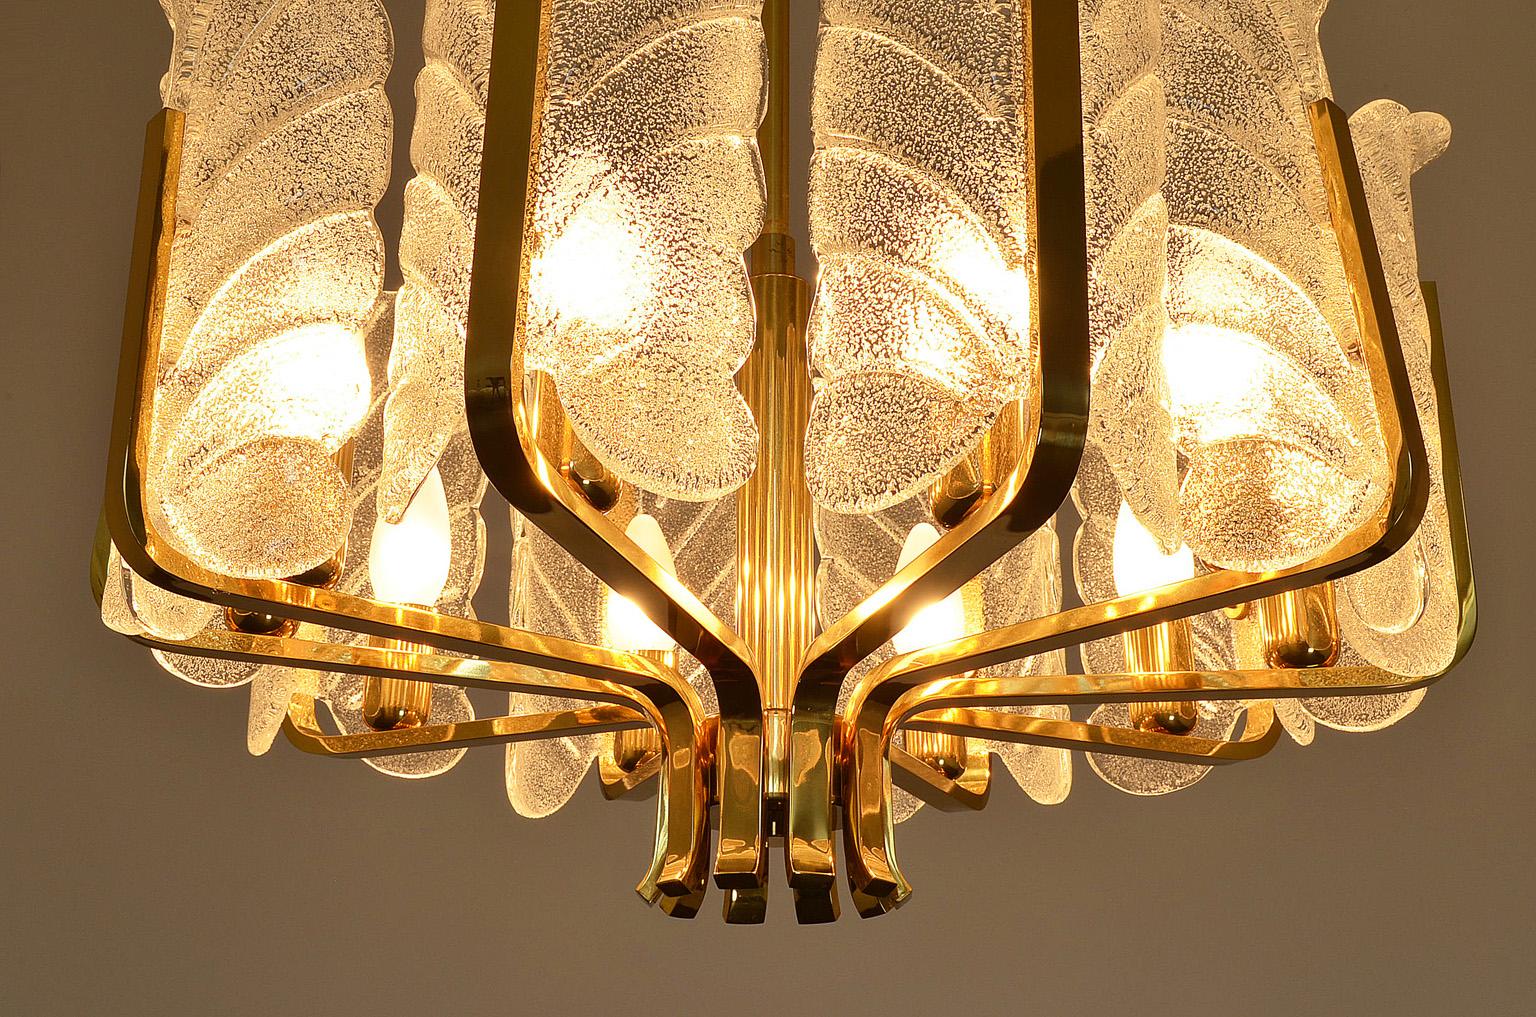 Chandelier by Carl Fagerlund for Orrefors 1960s Gold Brass Glass Acanthus Leaves (Mitte des 20. Jahrhunderts) im Angebot